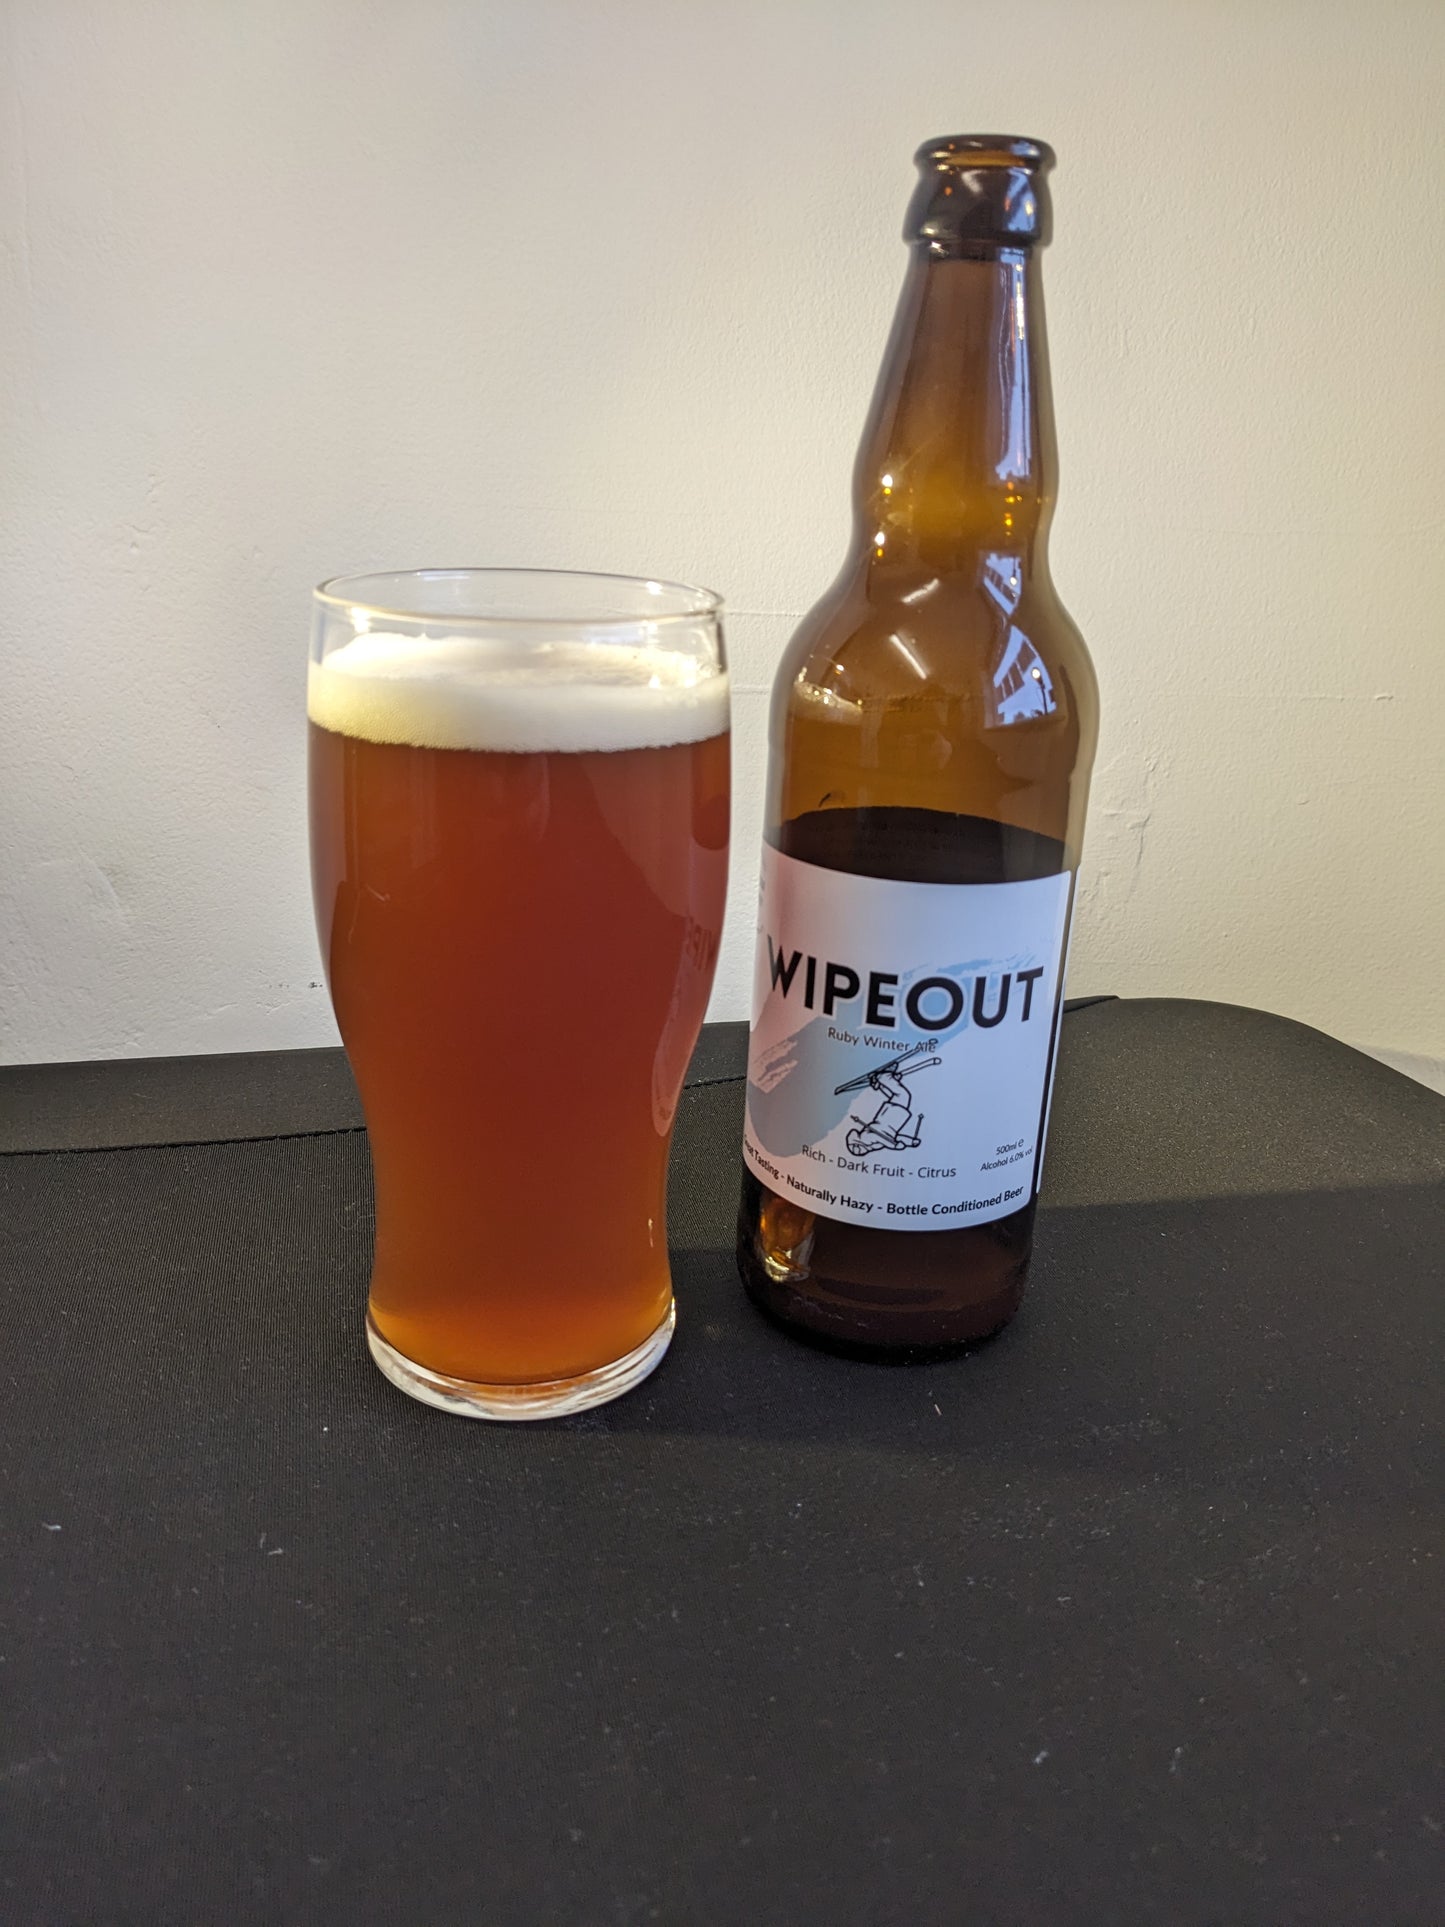 Beer poured into a pint glass with bottle beside it. Wipeout Ruby Ale. Great Tasting Naturally Hazy Bottle Conditioned Beer